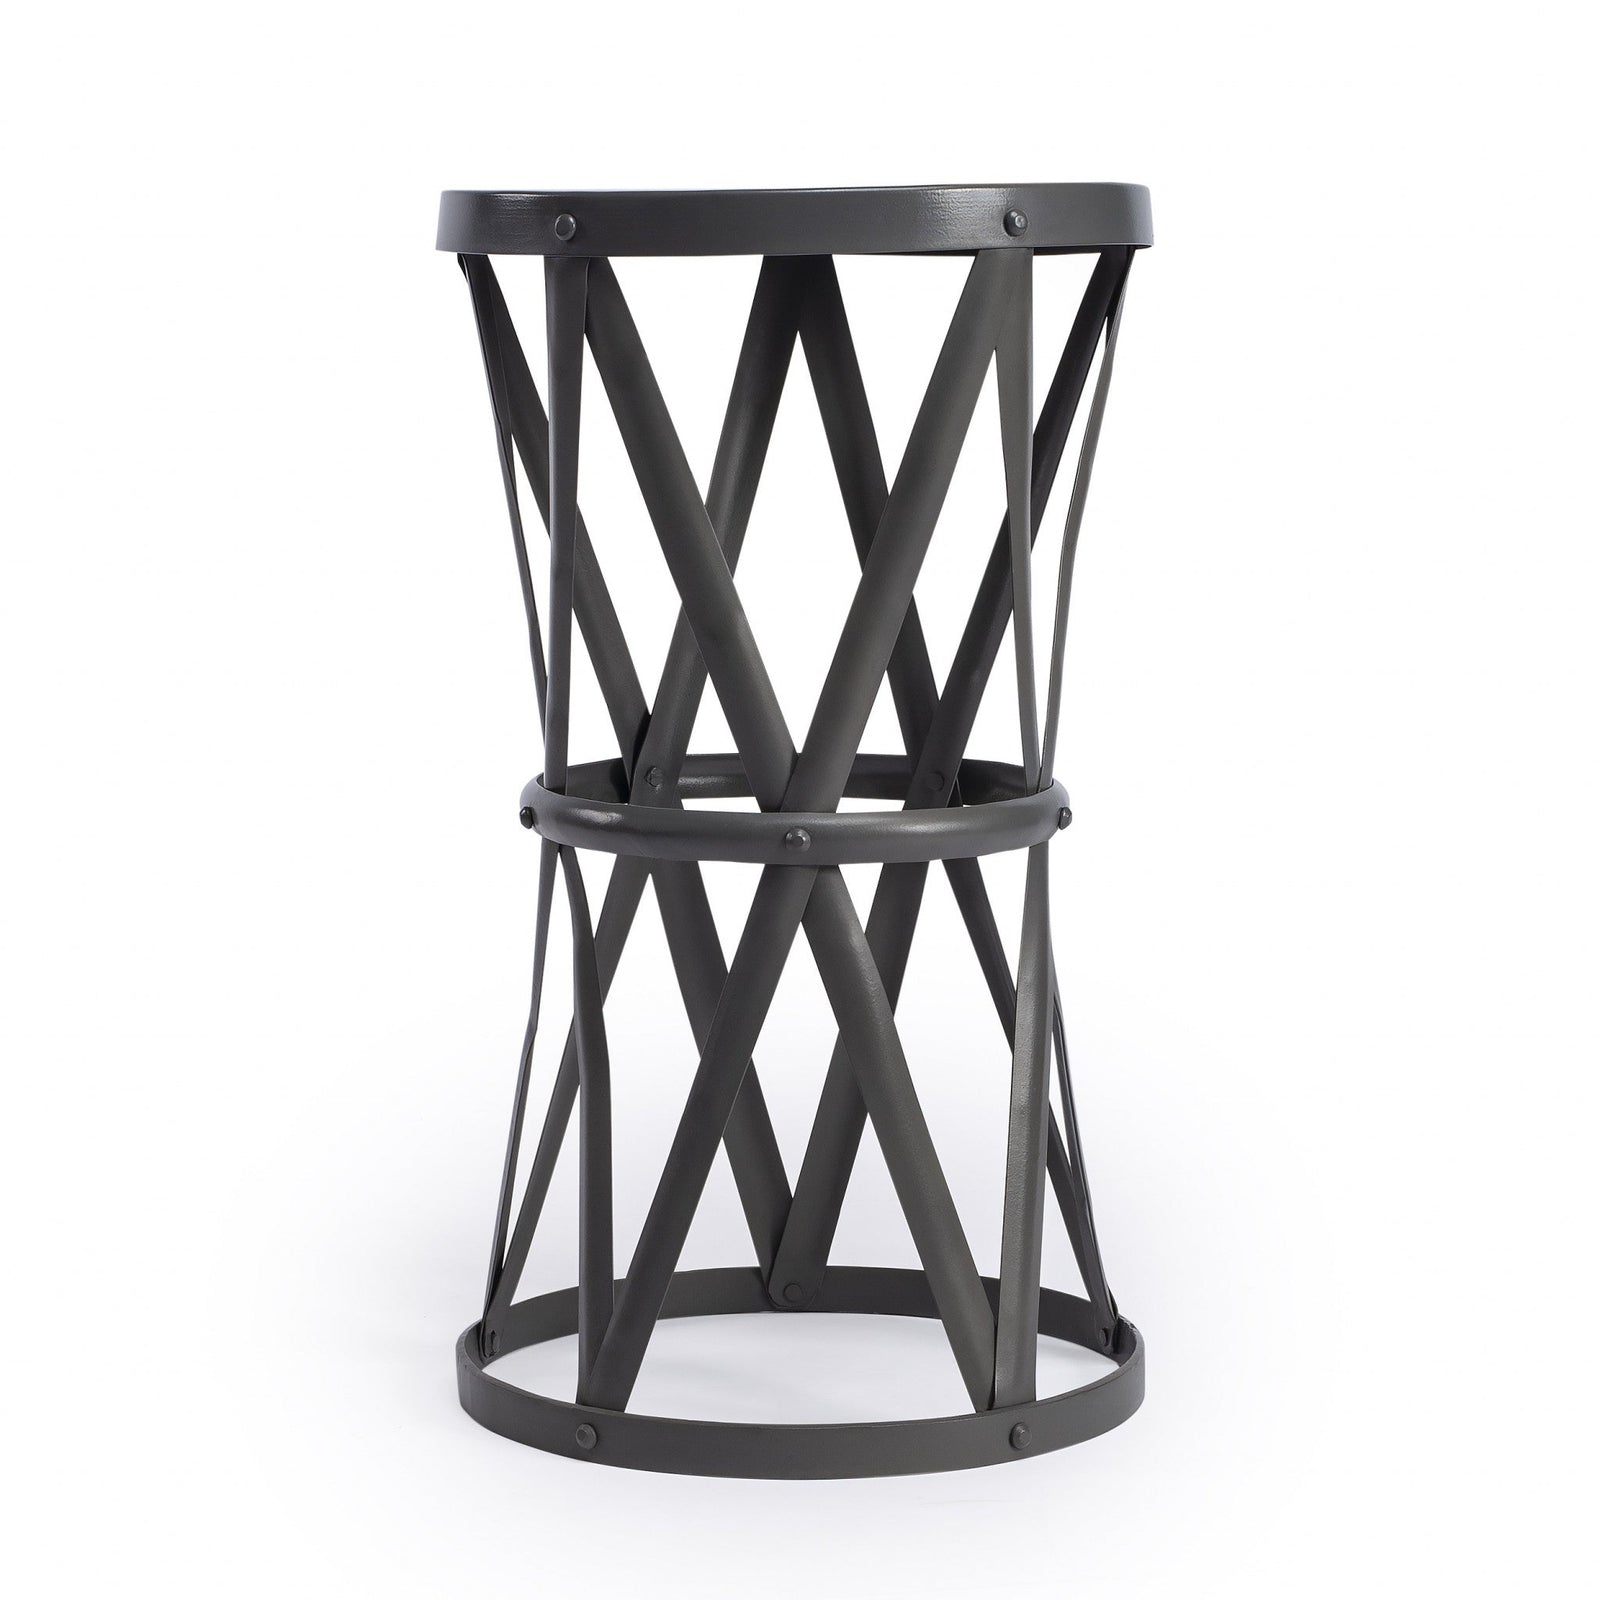 22" Gray Iron Hourglass Base Round Top End Table